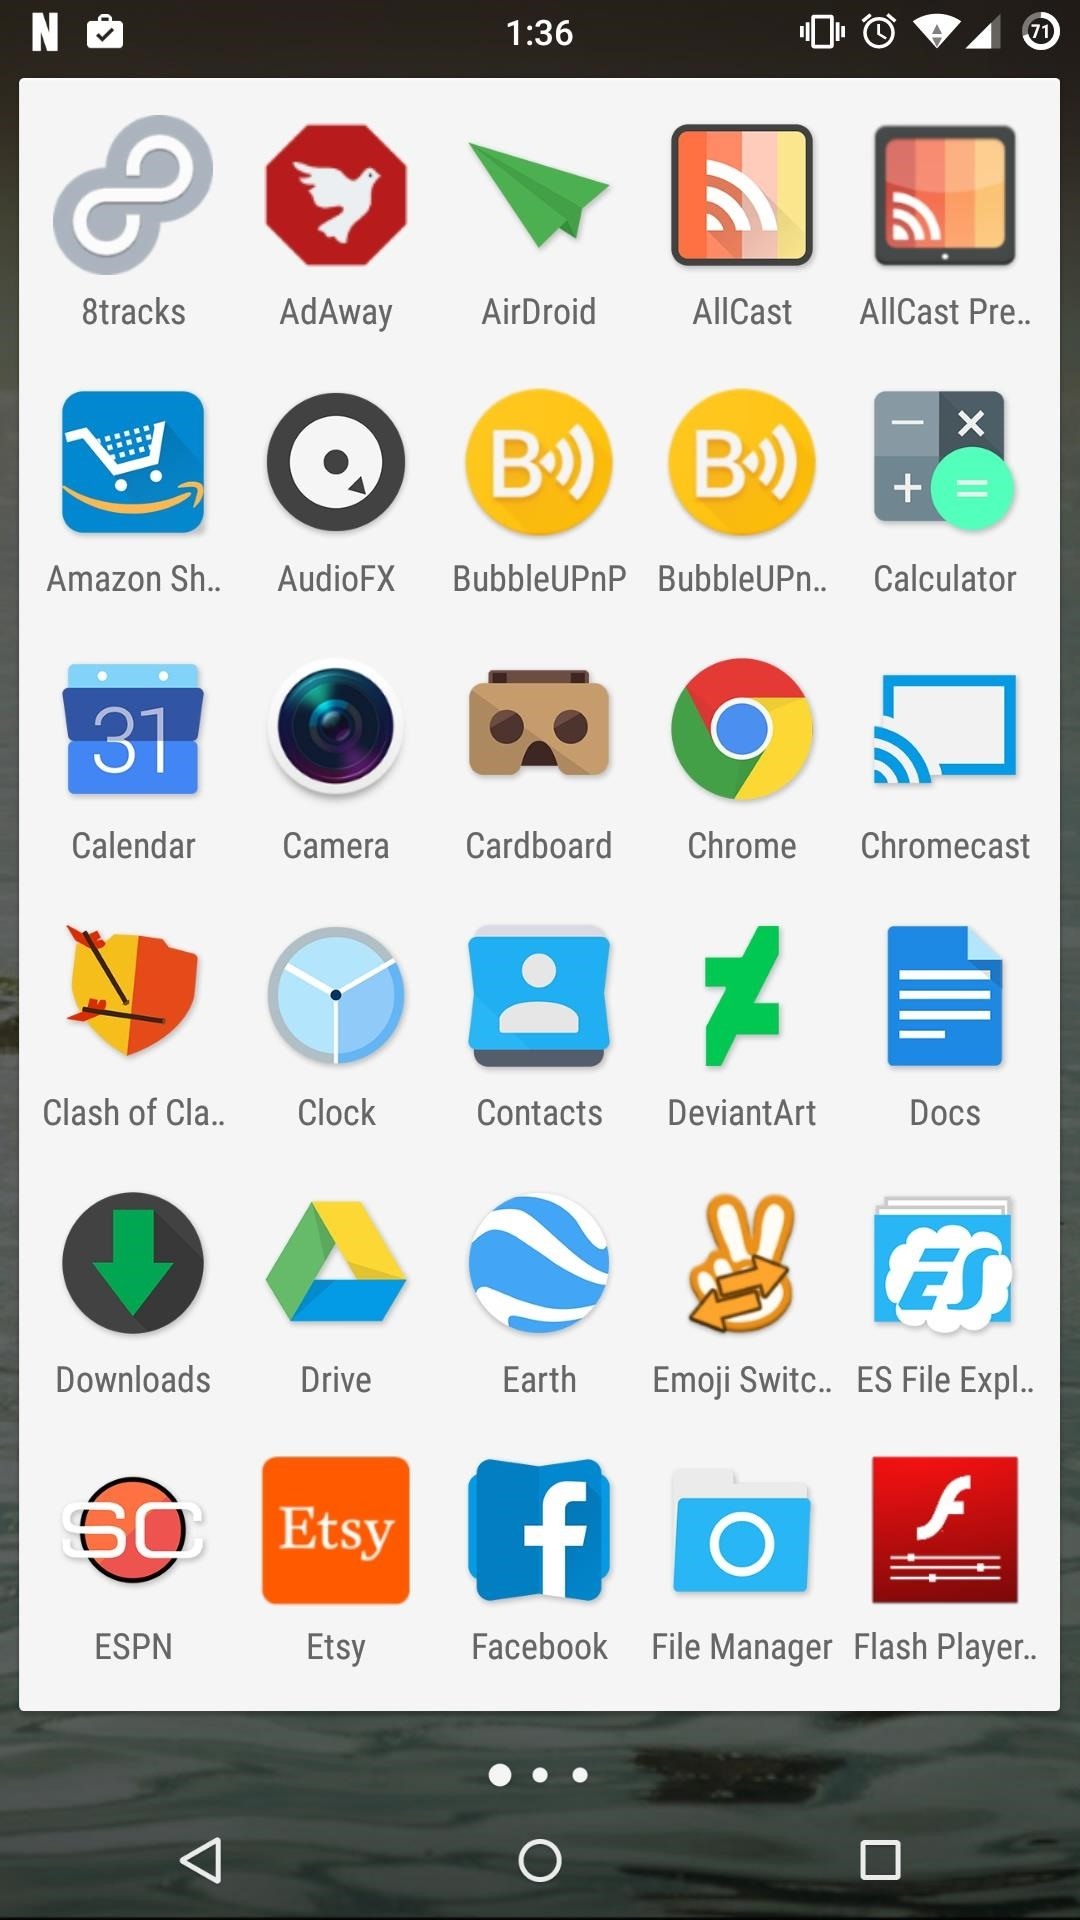 How to Theme Every Aspect of Your Android Phone for a Truly Unique Look & Feel